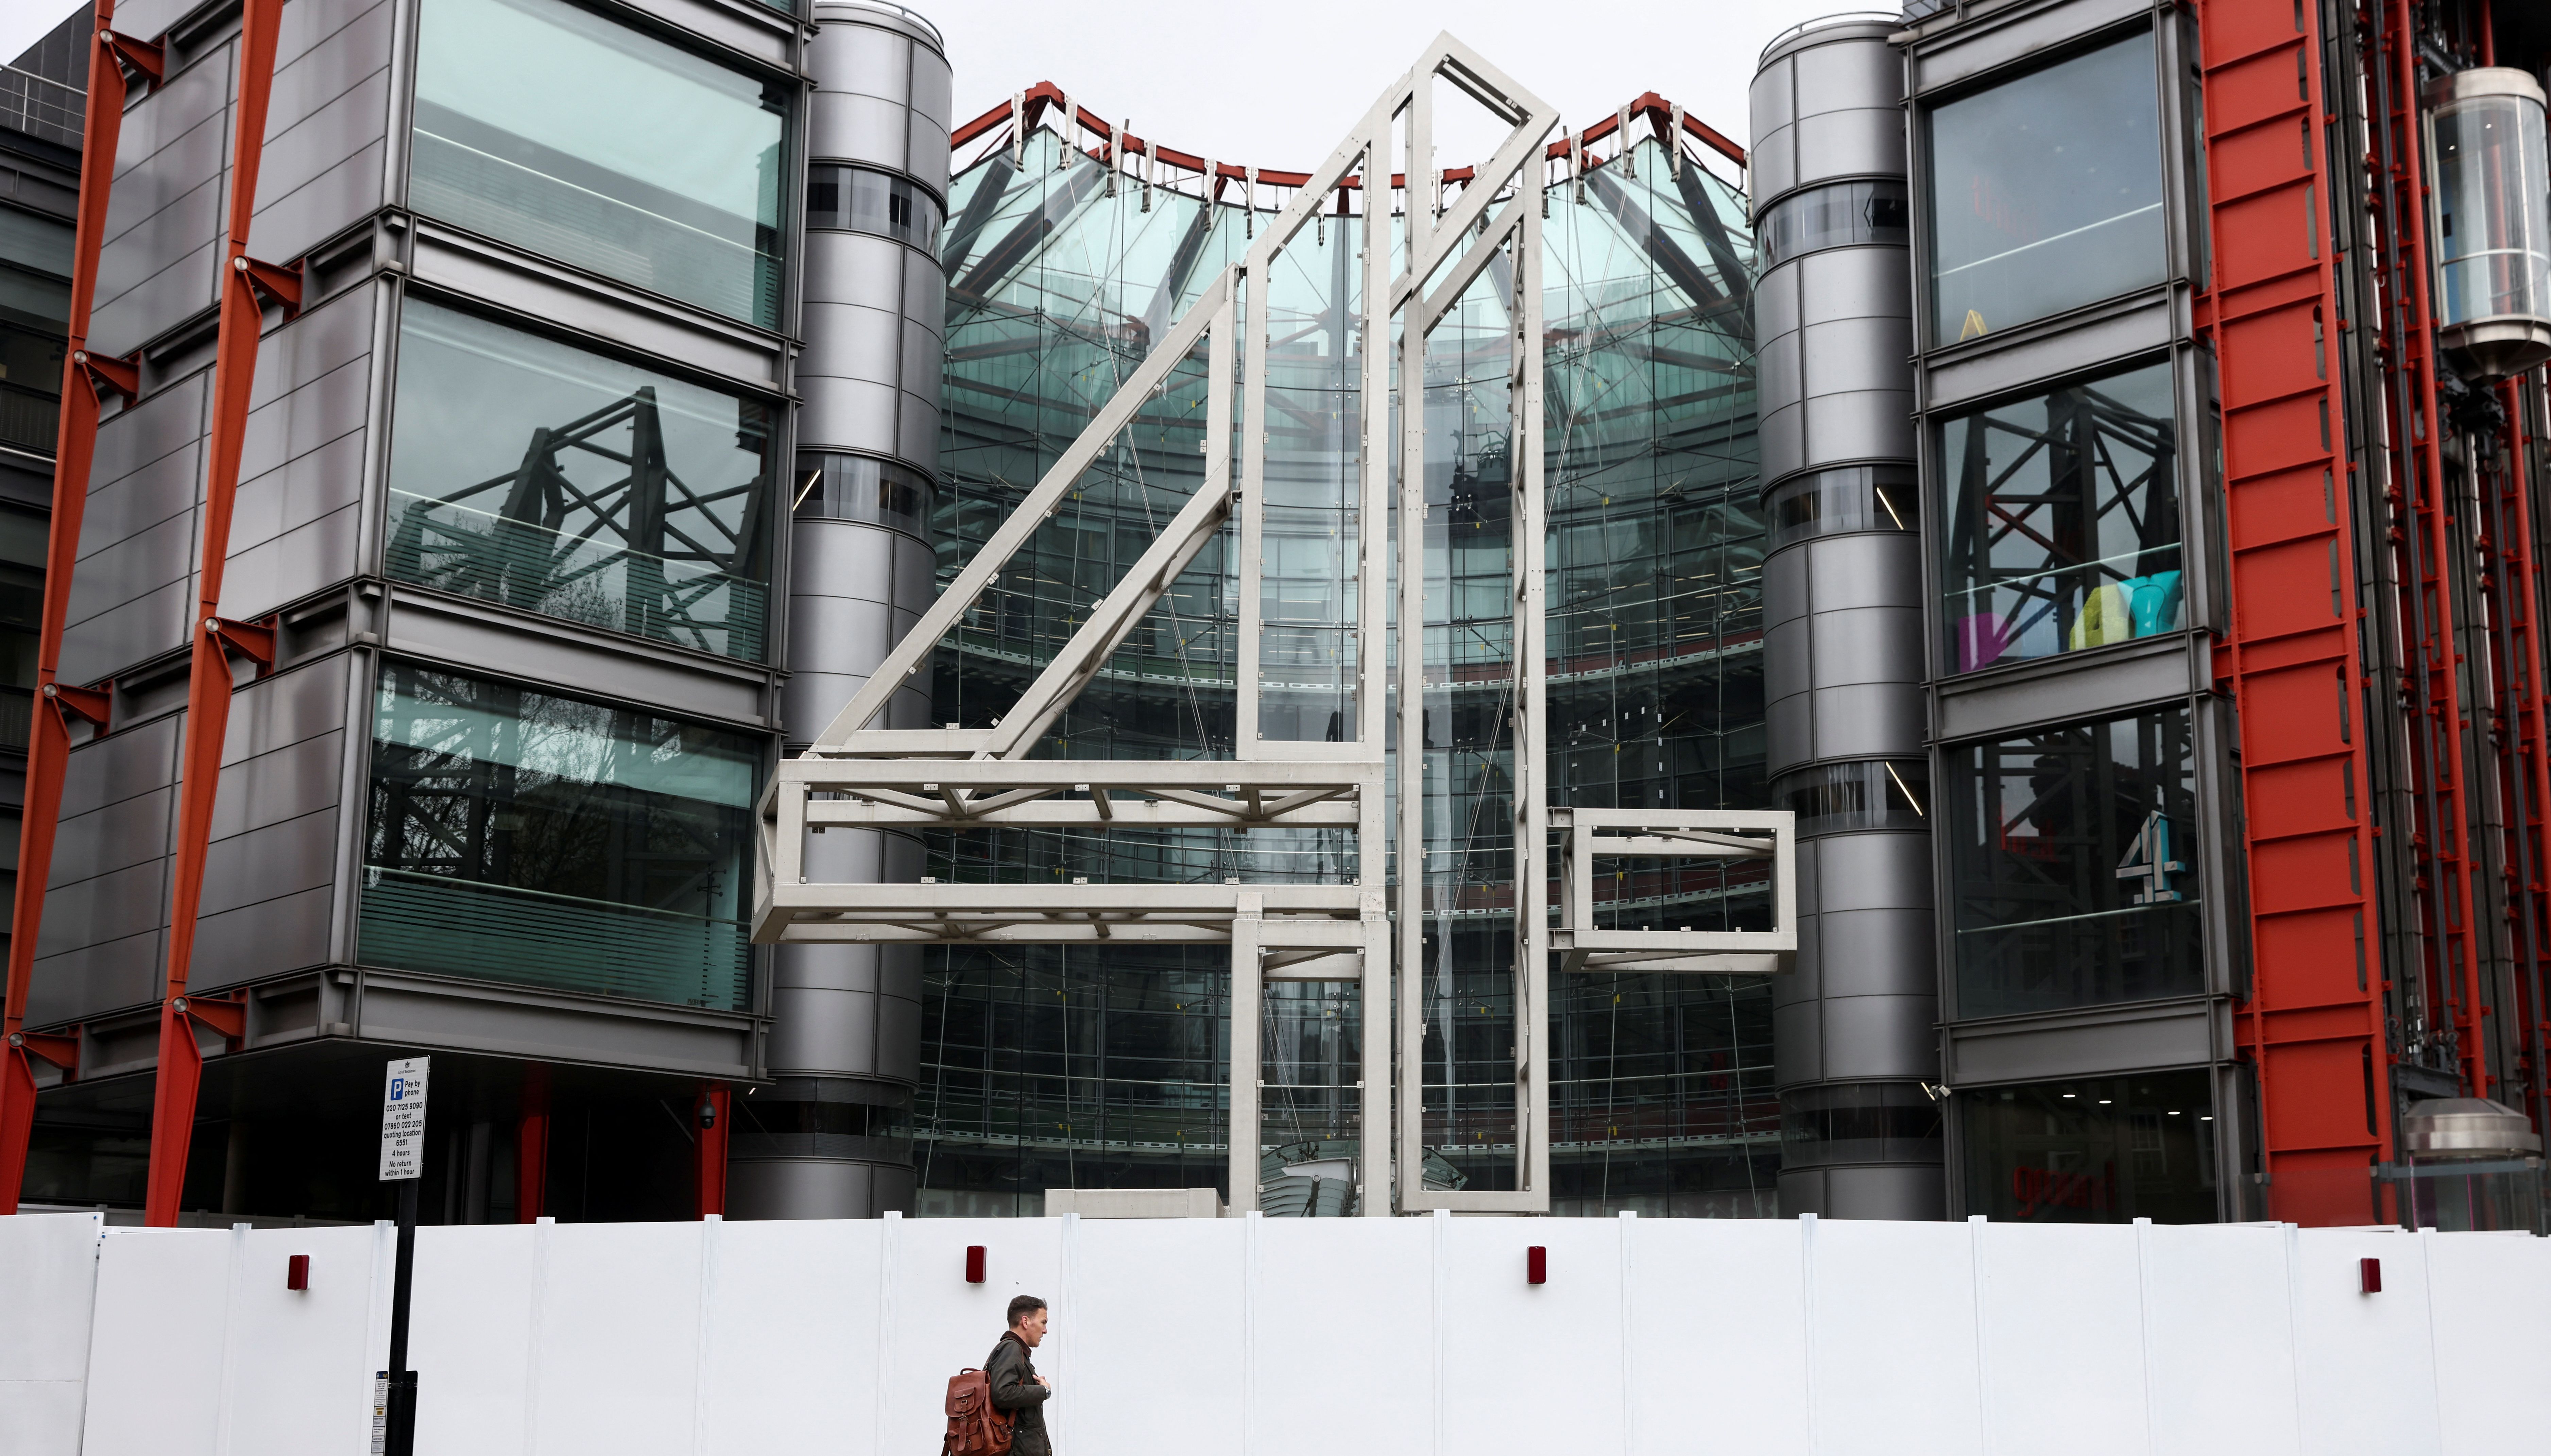 Channel 4 Television studios in London